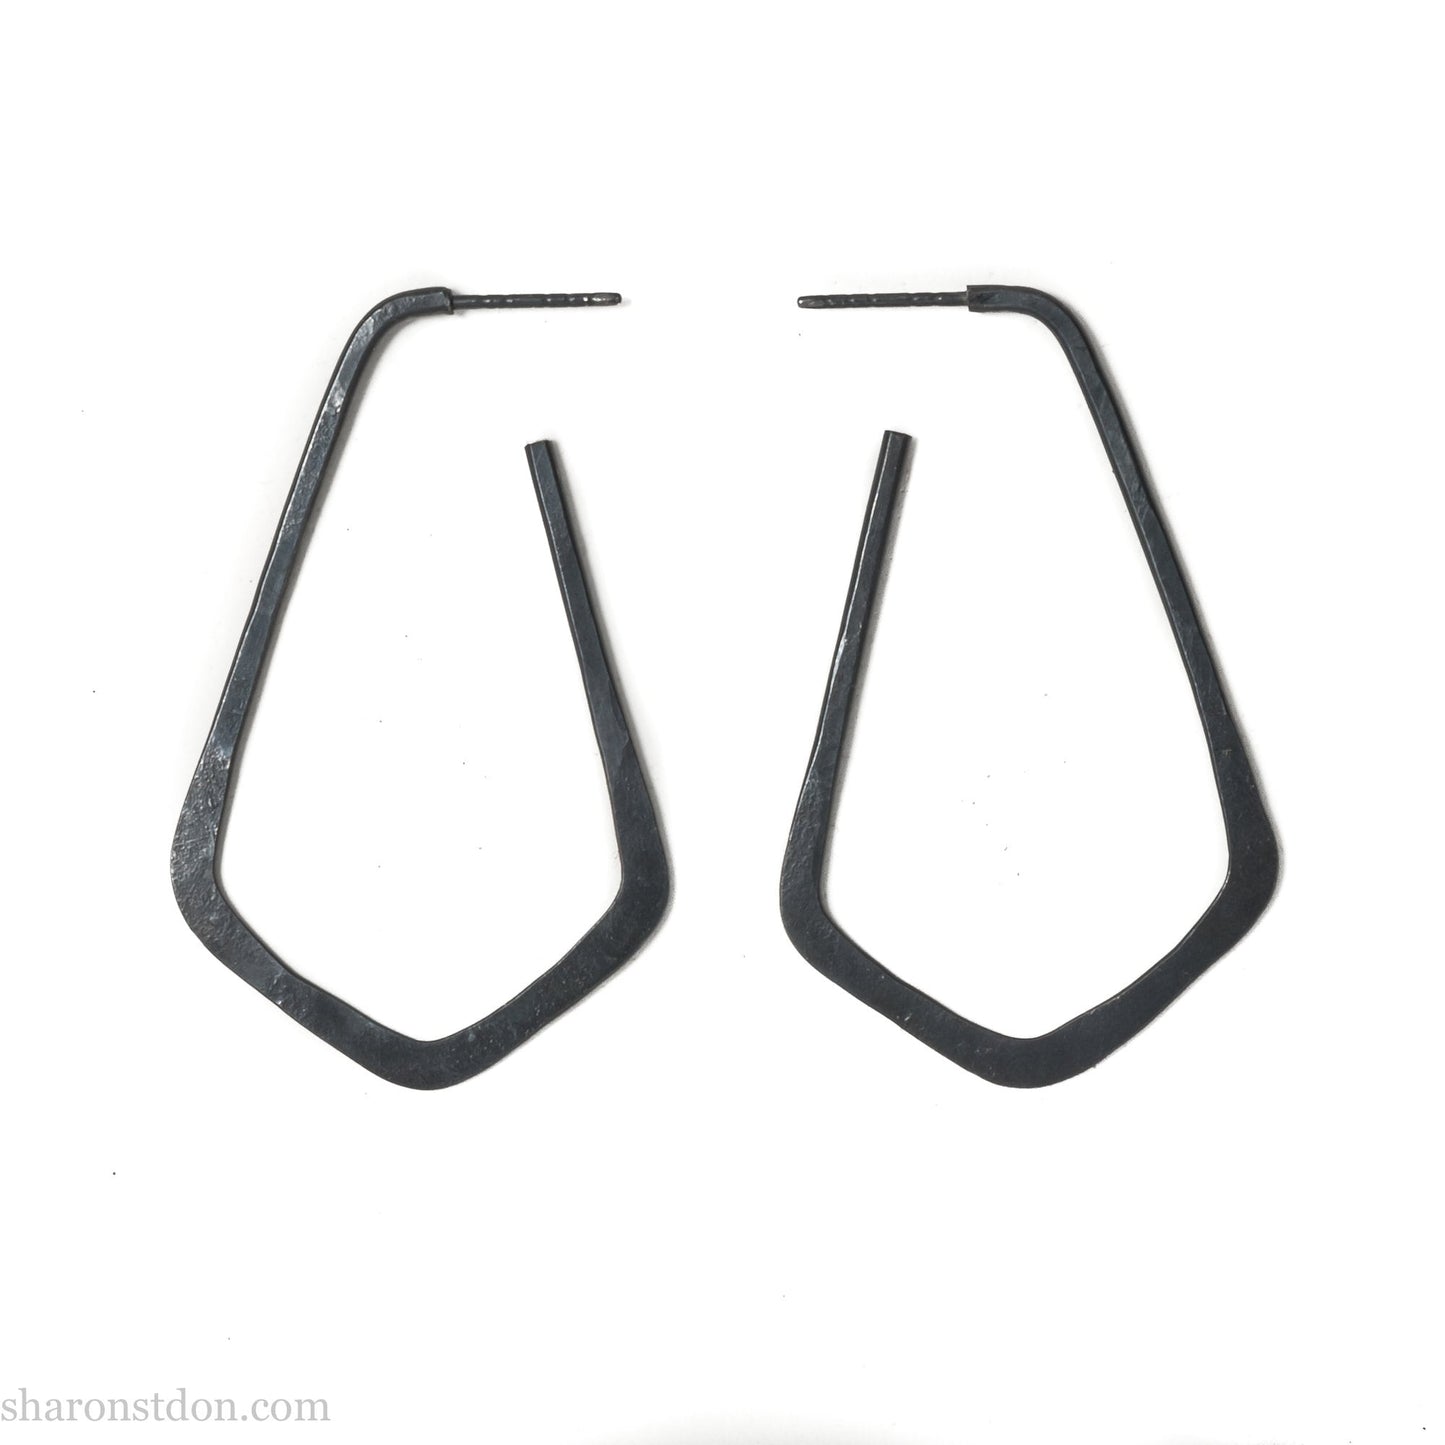 925 sterling silver hoop earrings handmade in North America by Sharon SaintDon. Long, angular, teardrop shape with three points at bottom, oxidized black with hammered texture. SIZE: 5cm high x 32mm wide